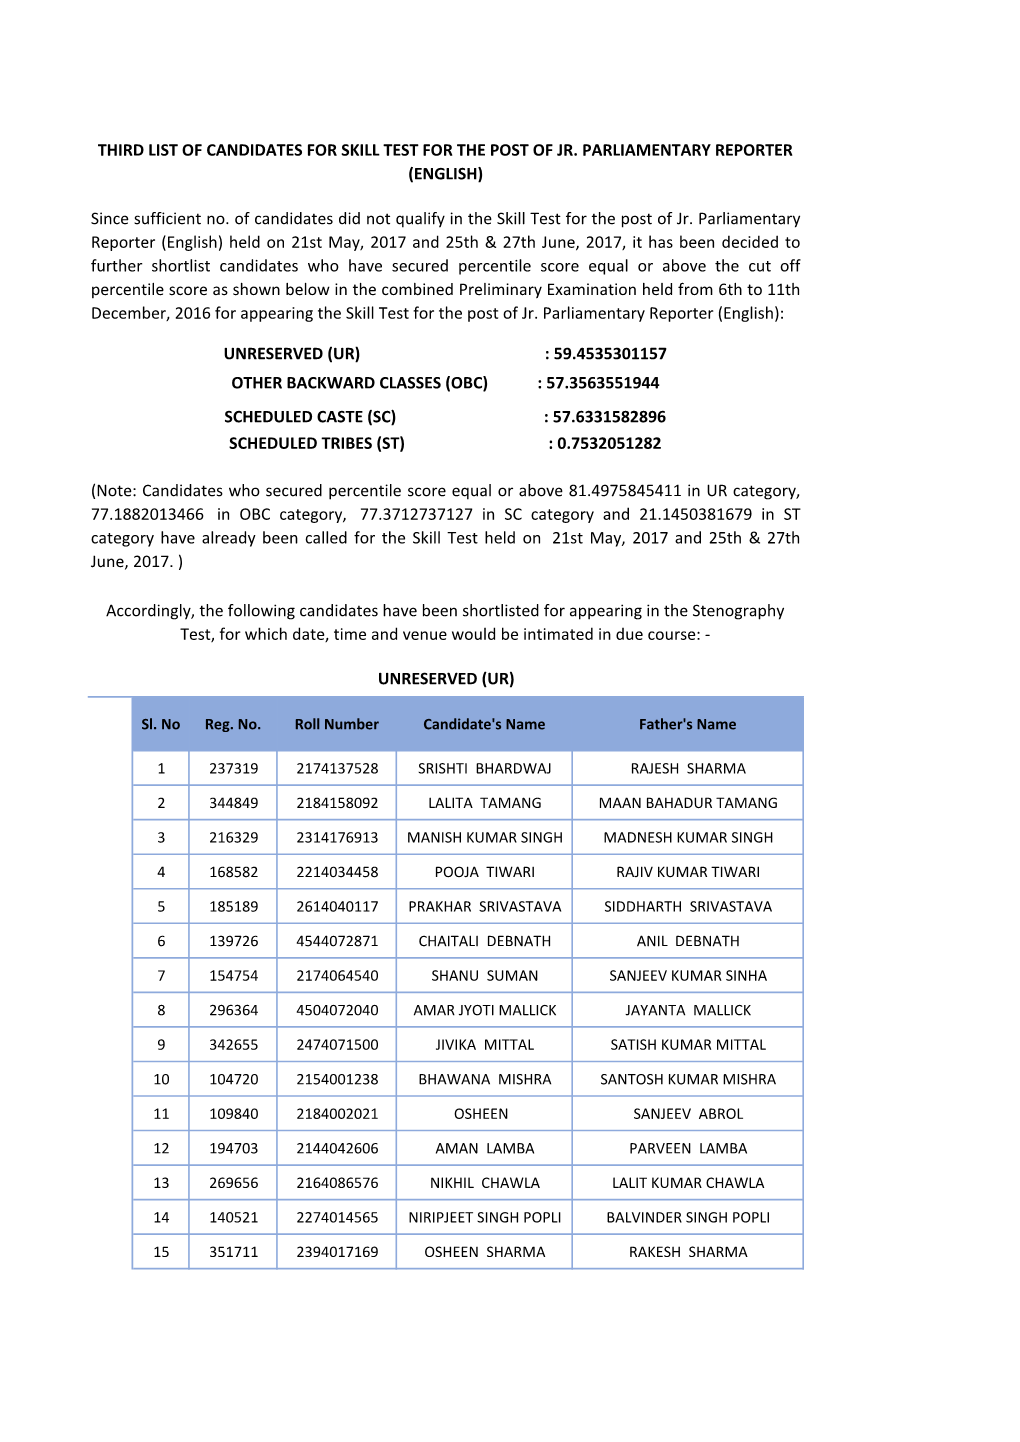 Third List of Candidates for Skill Test for the Post of Jr